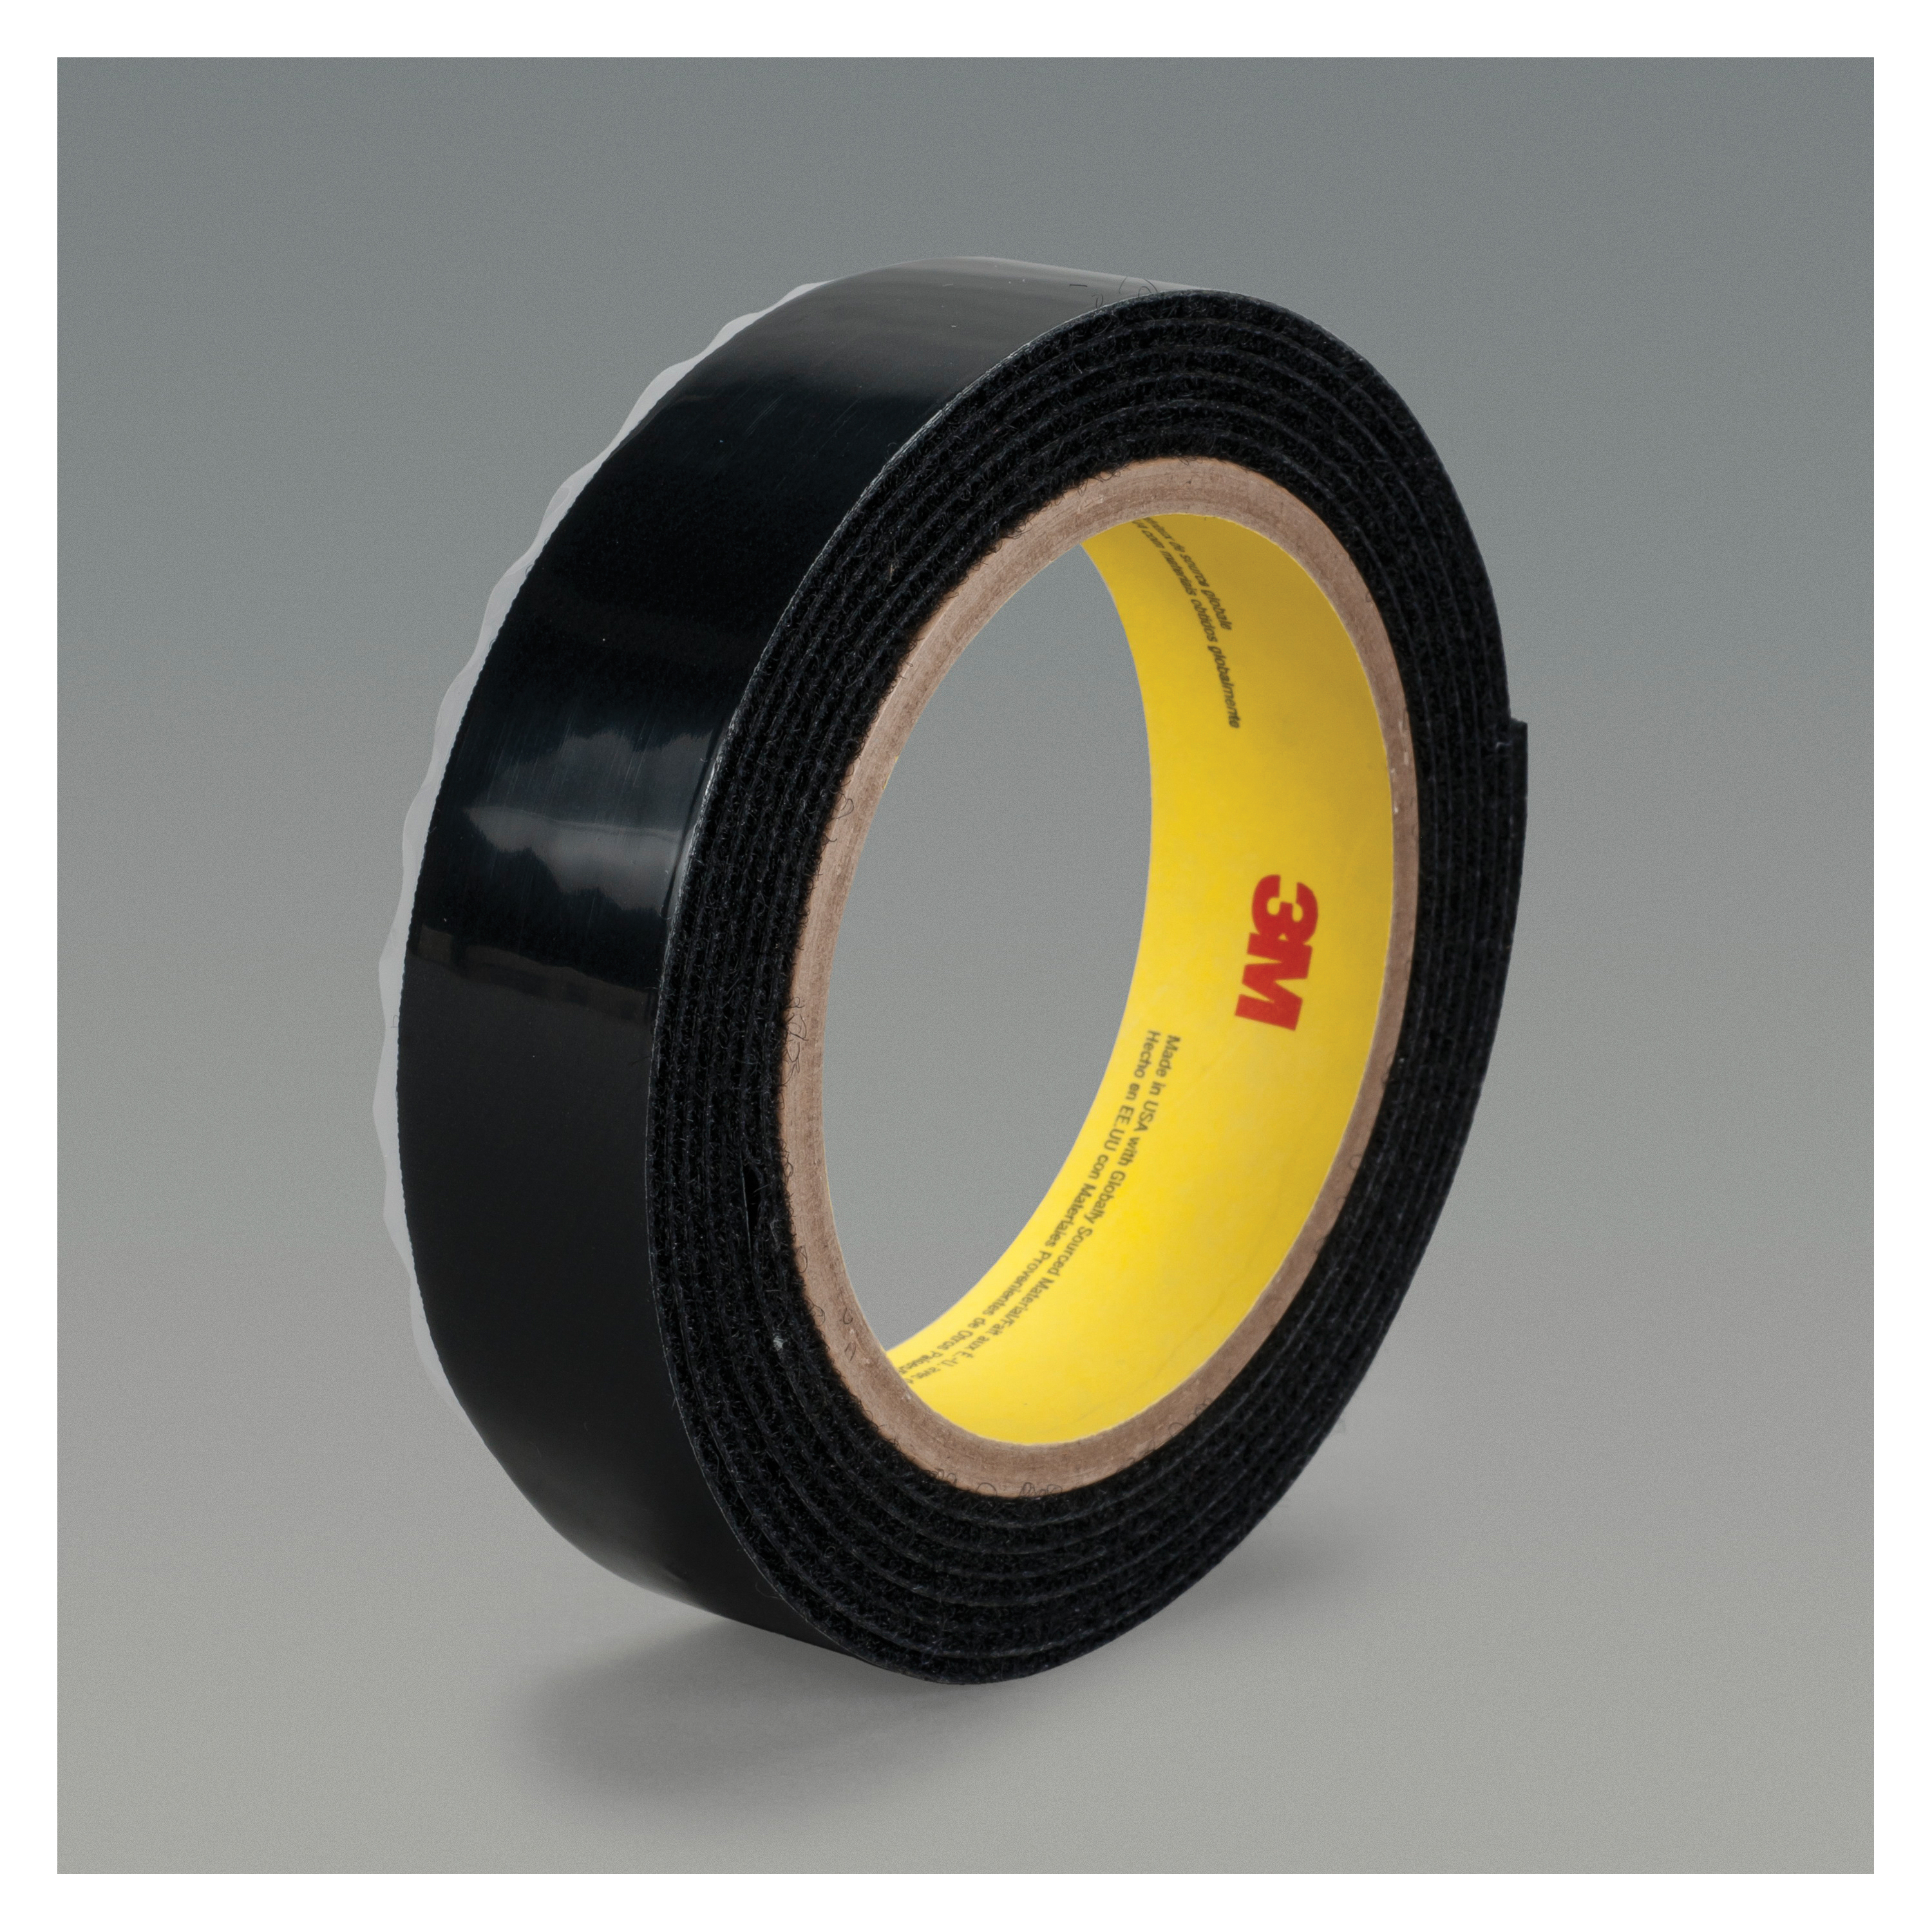 3M™ 021200-86237 Reclosable Loop Fastener Tape, 50 yd L x 5/8 in W, 0.15 in THK Engaged, Acrylic Adhesive, Woven Nylon Backing, Black